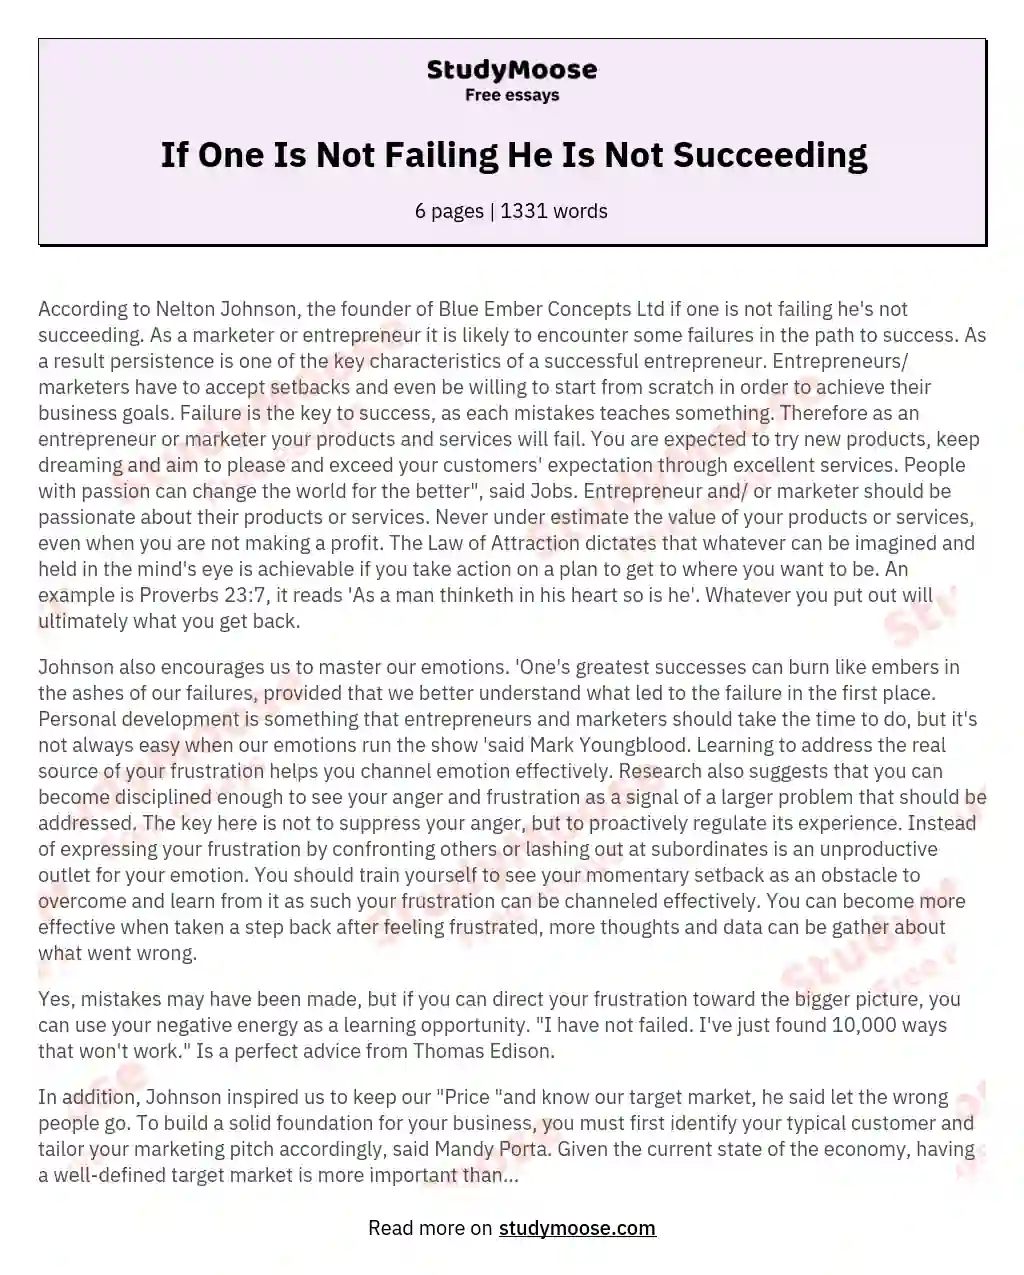 If One Is Not Failing He Is Not Succeeding essay